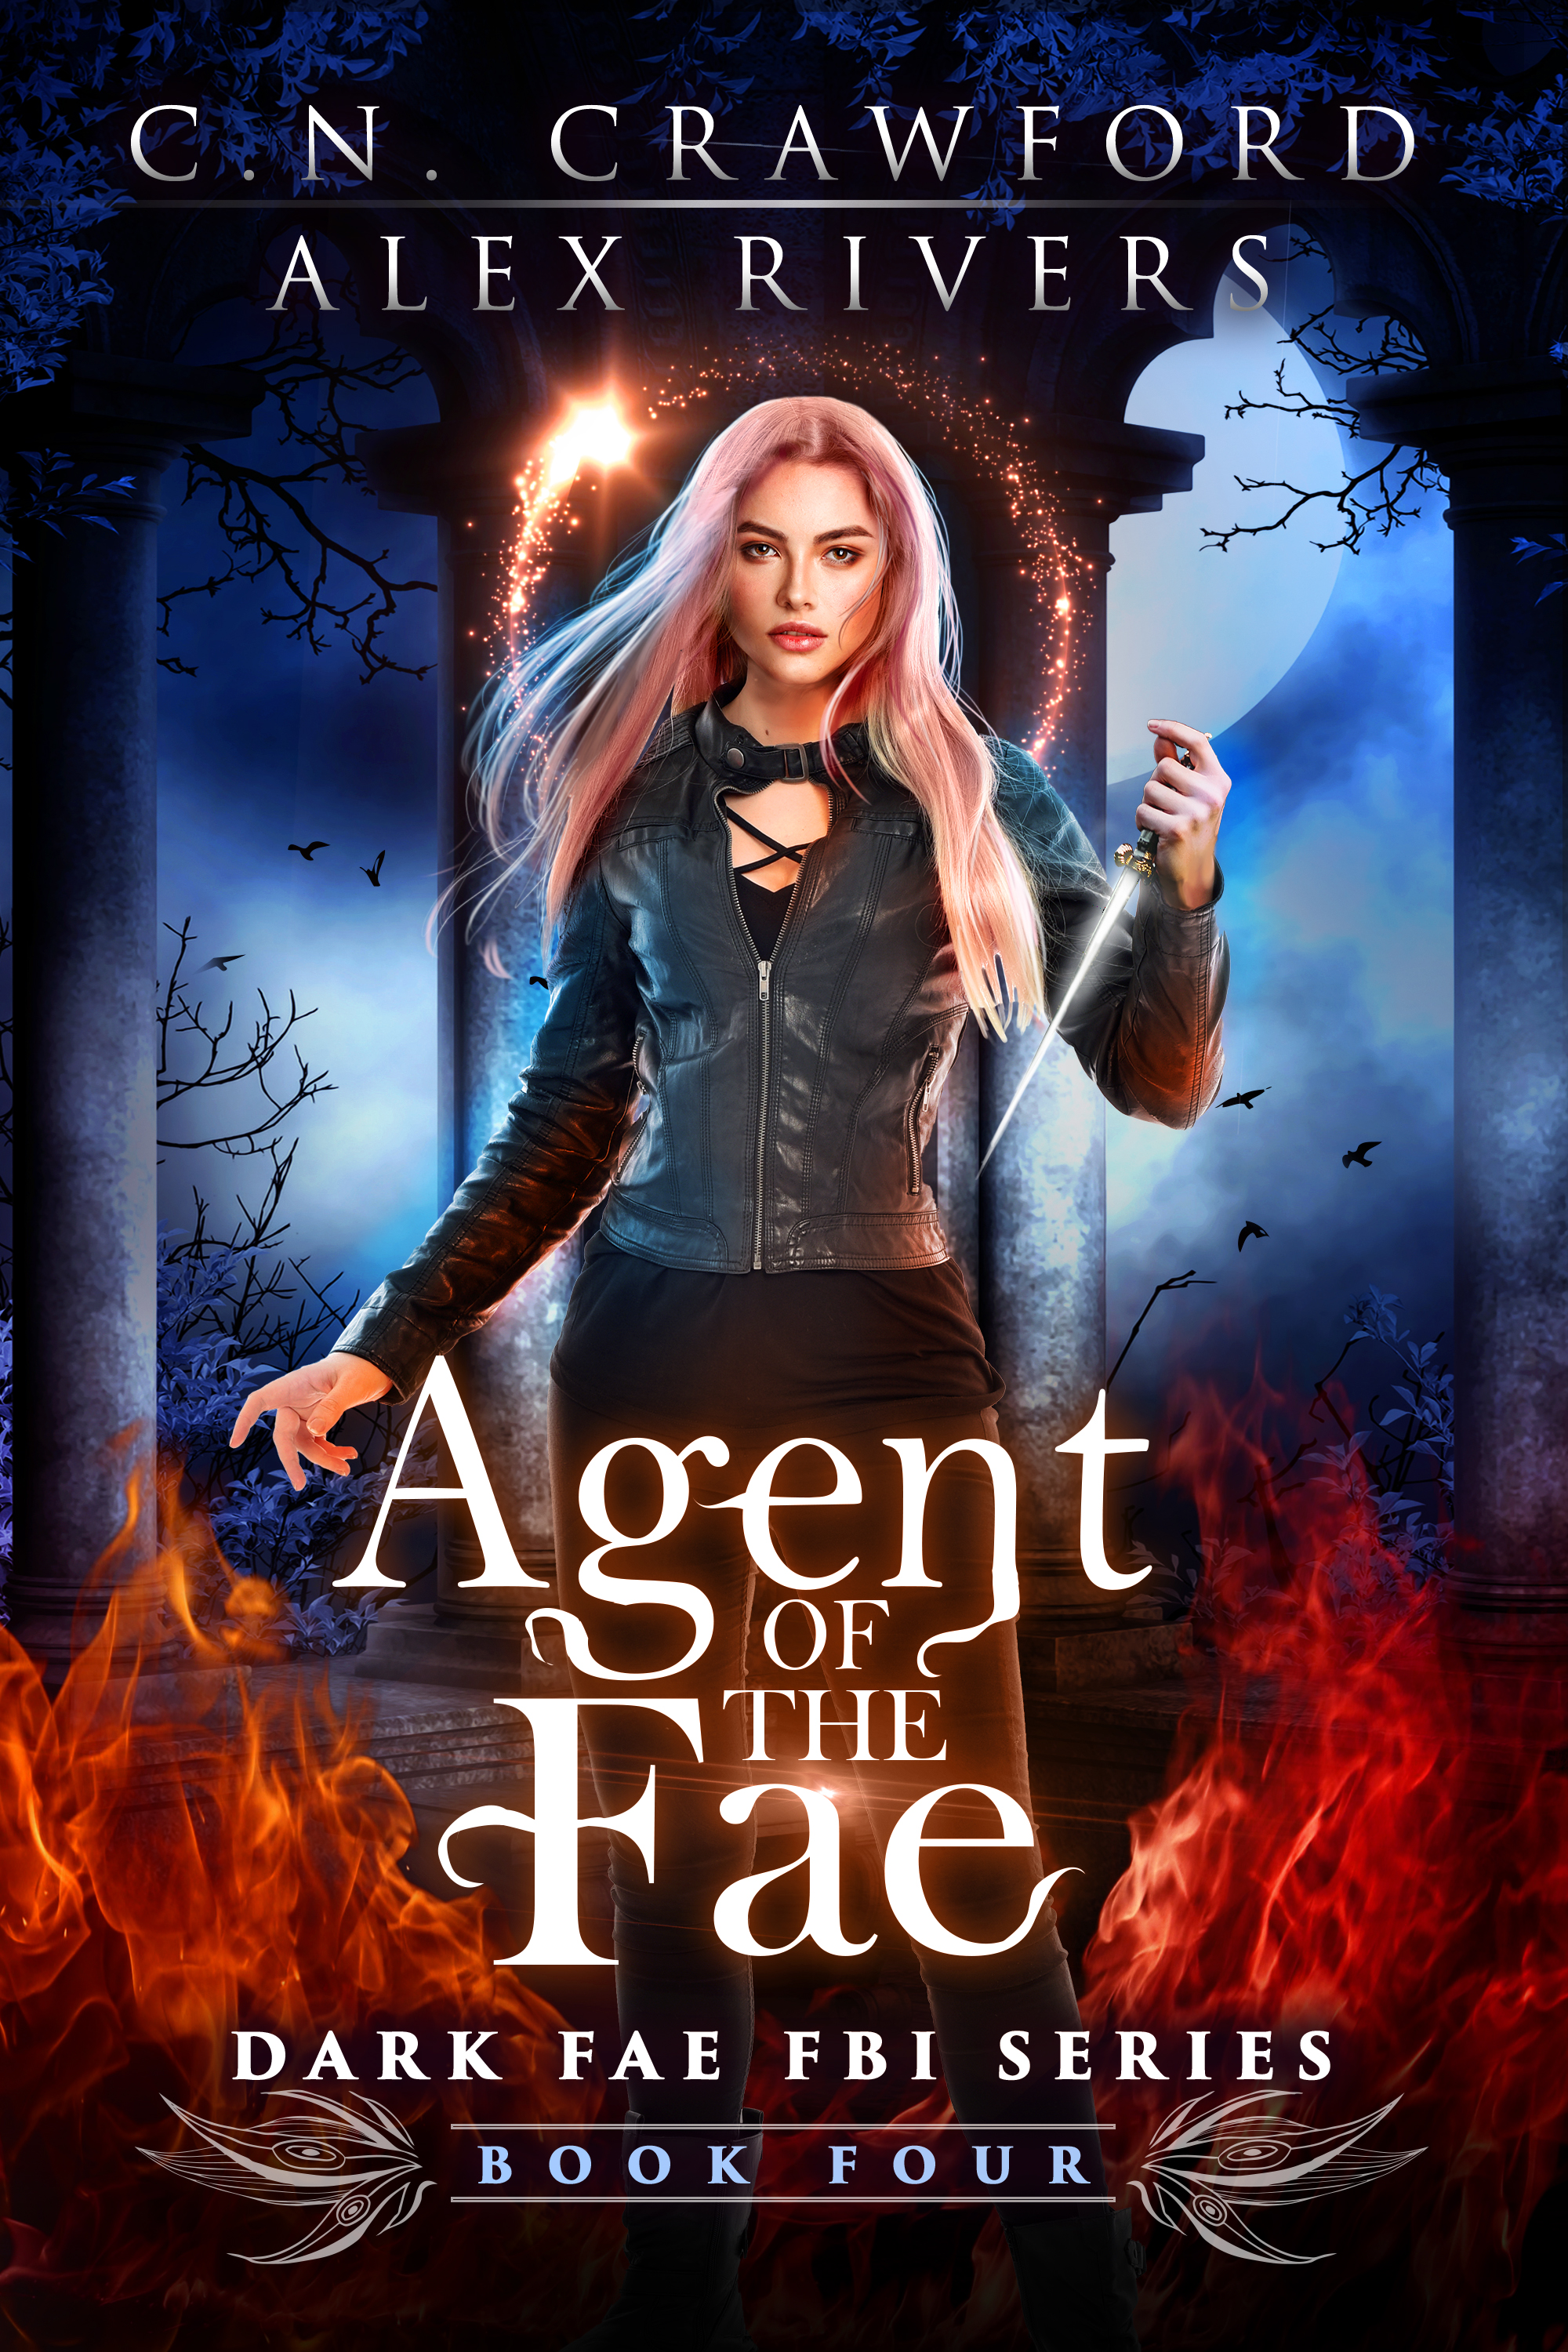 Book 4: Agent of the Fae